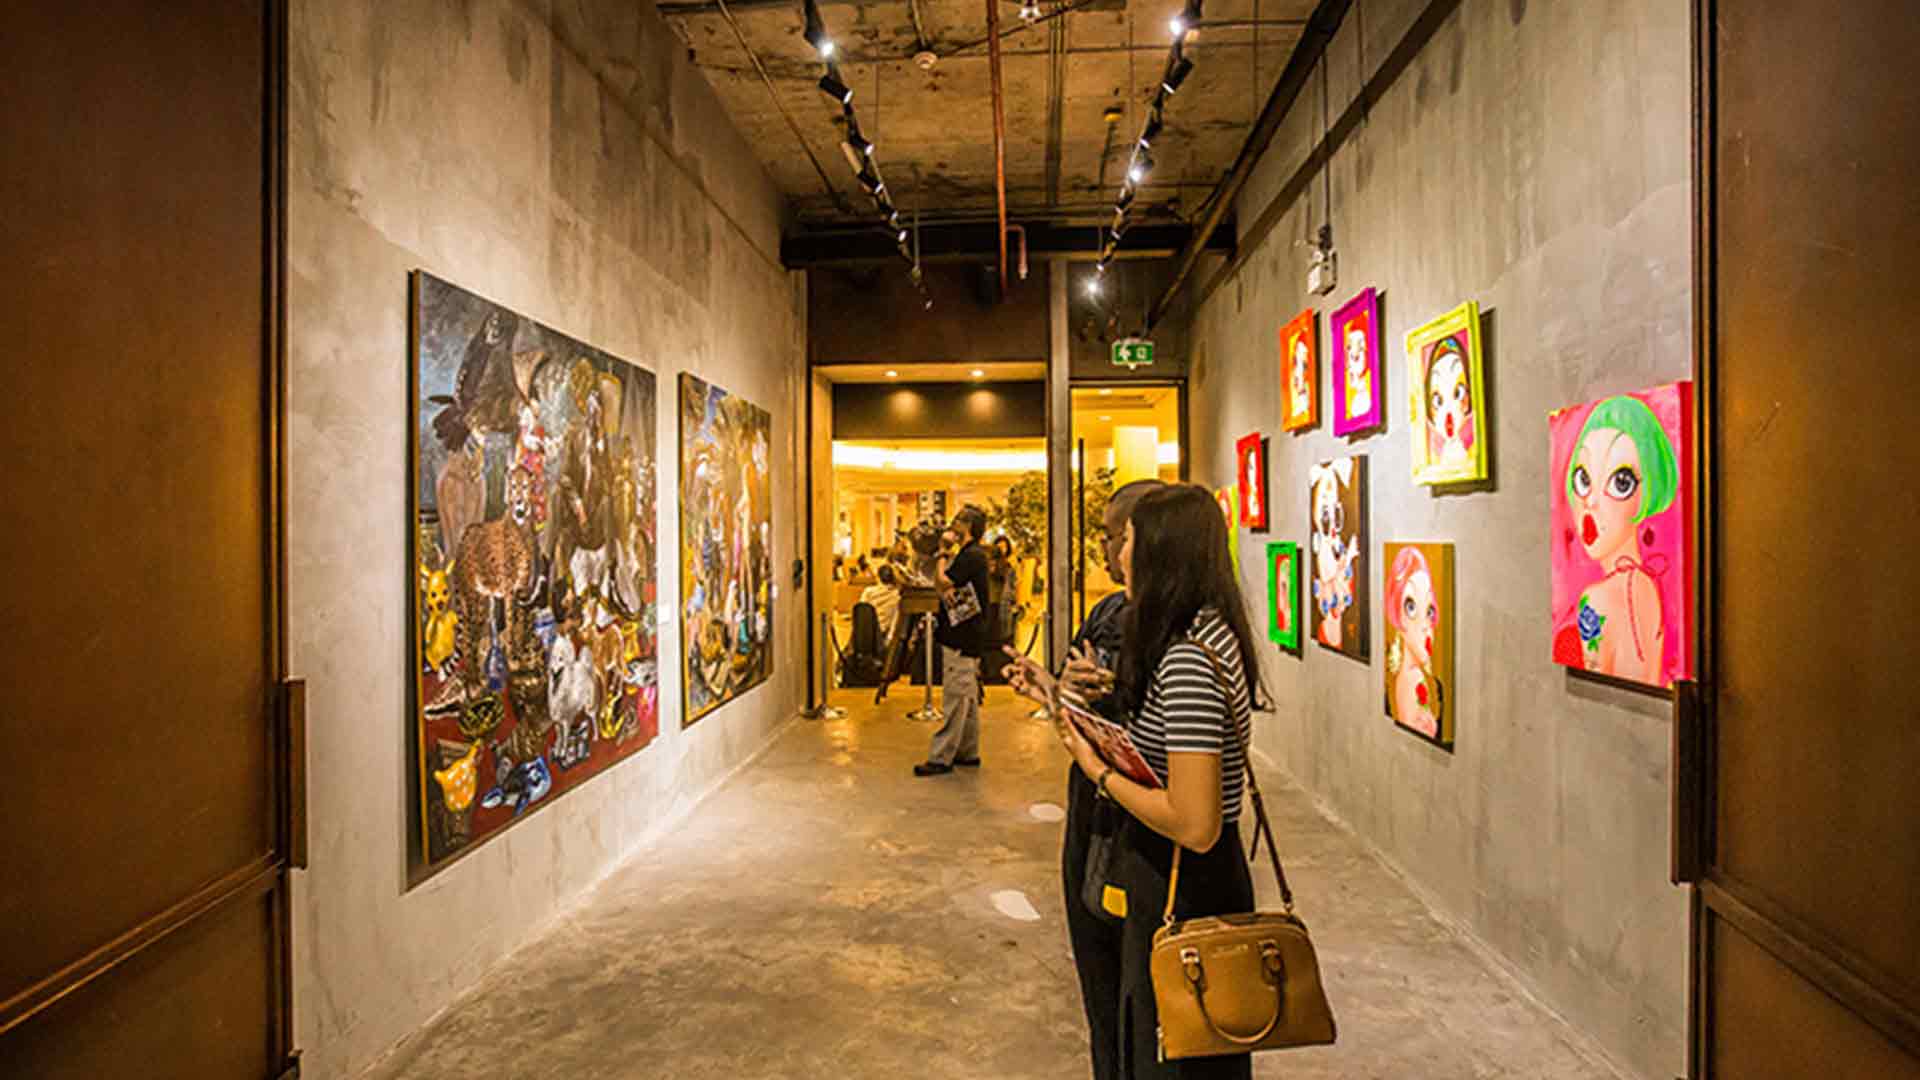 Gallery DUKE Contemporary Art Space at Gaysorn